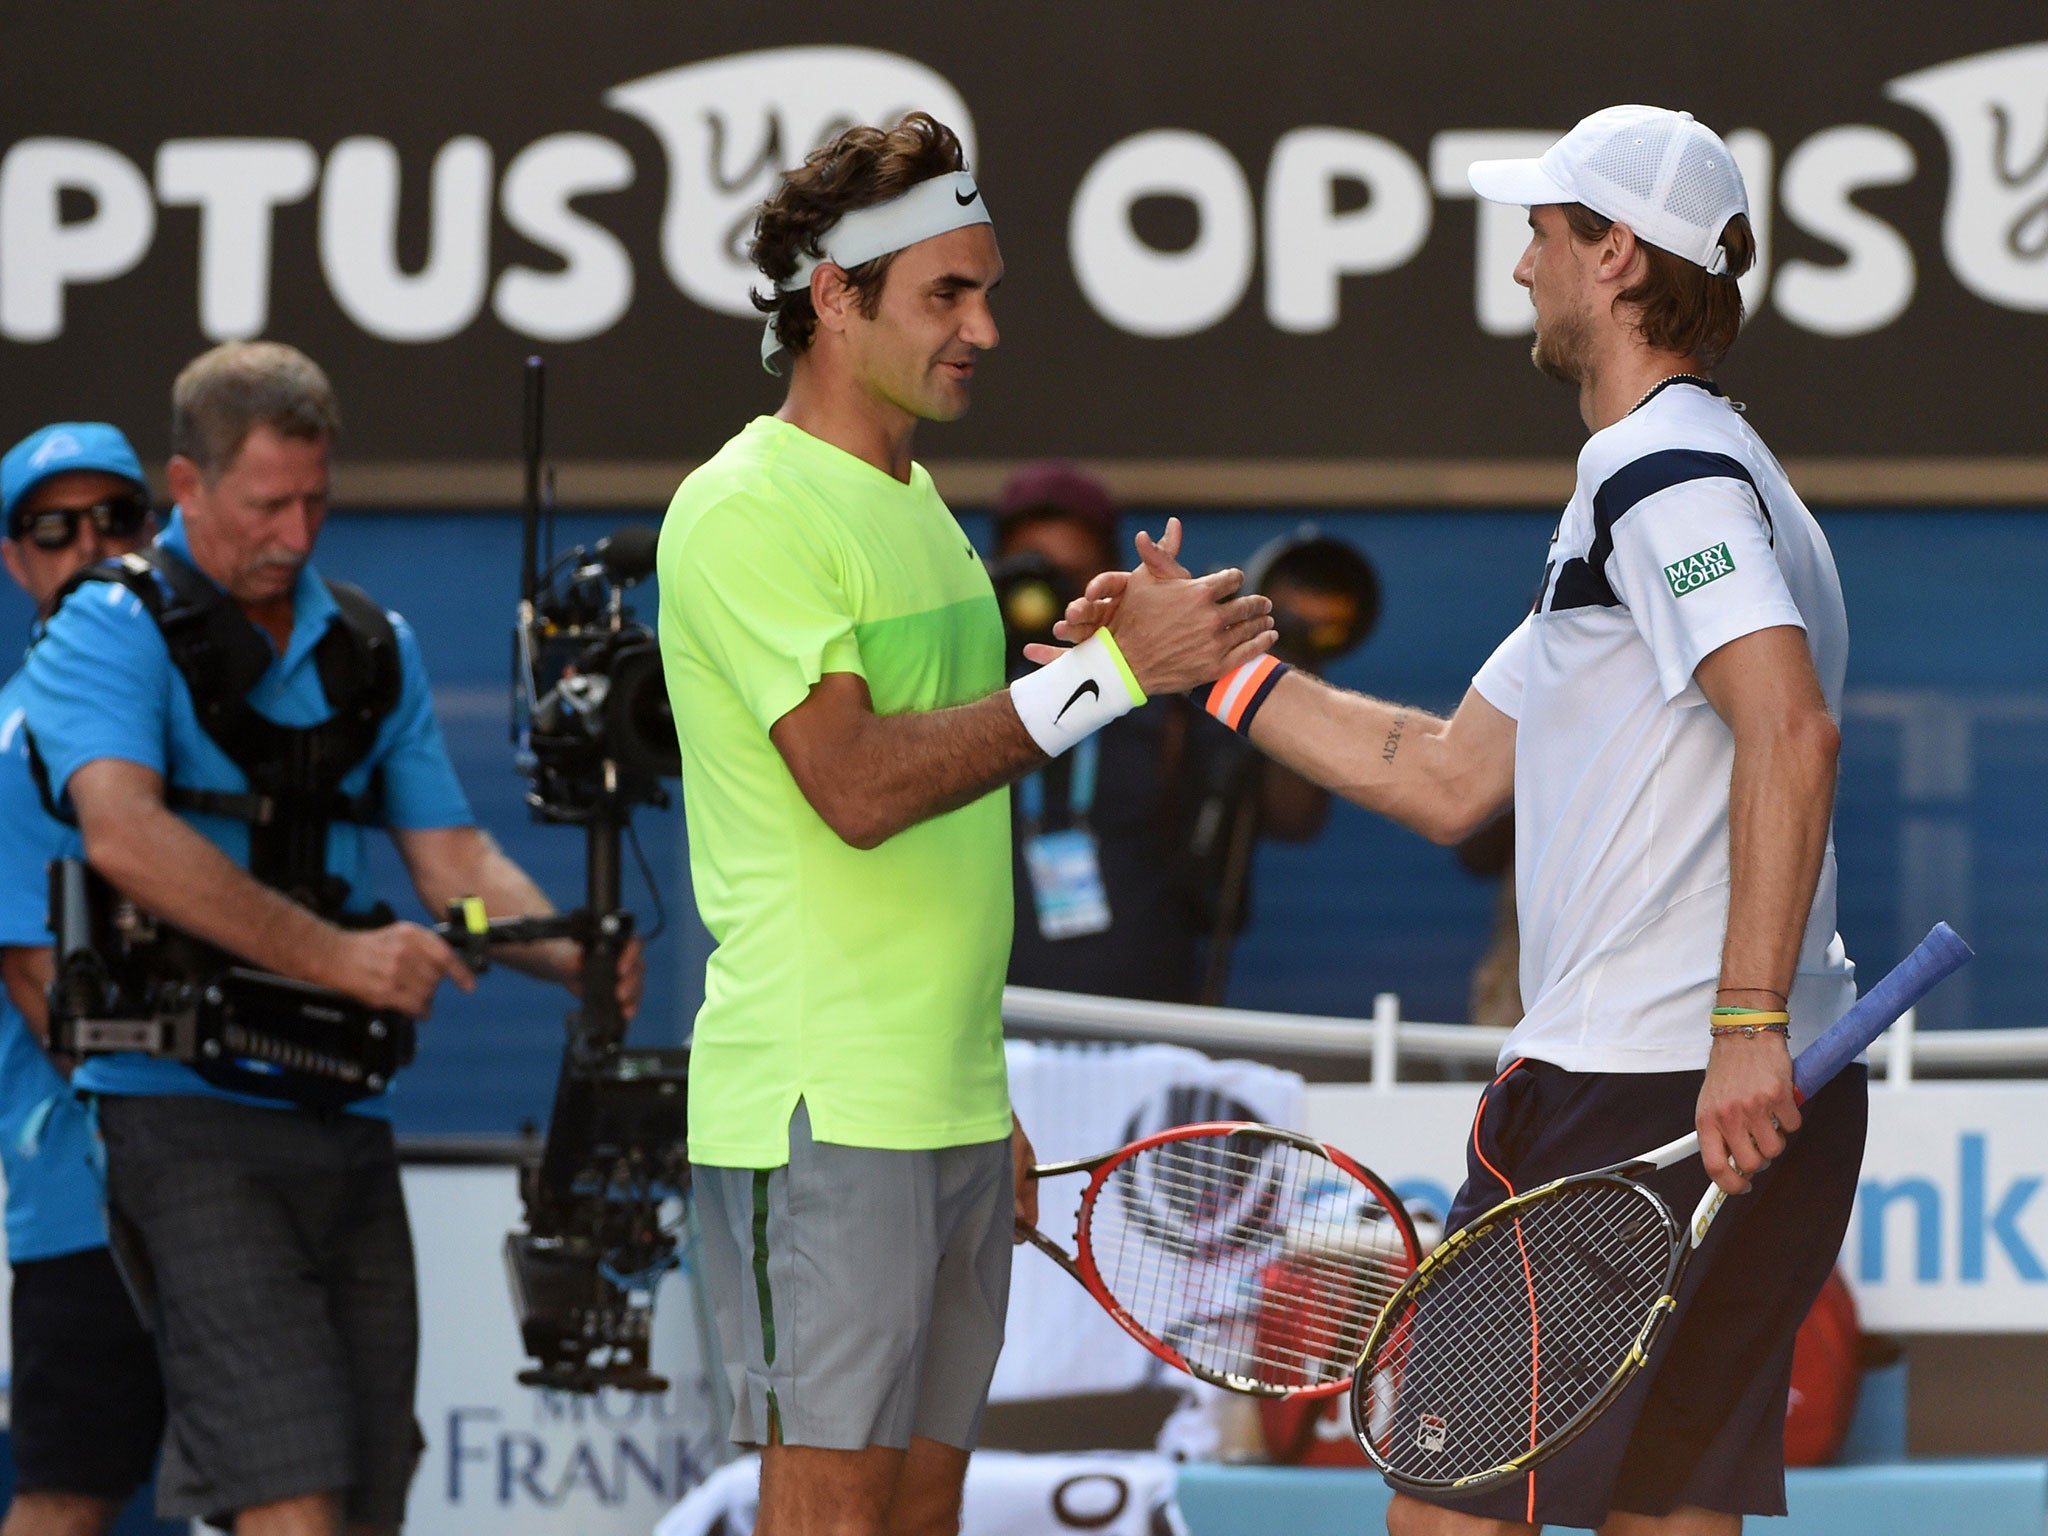 Federer shakes hands with Seppi after his third round elimination